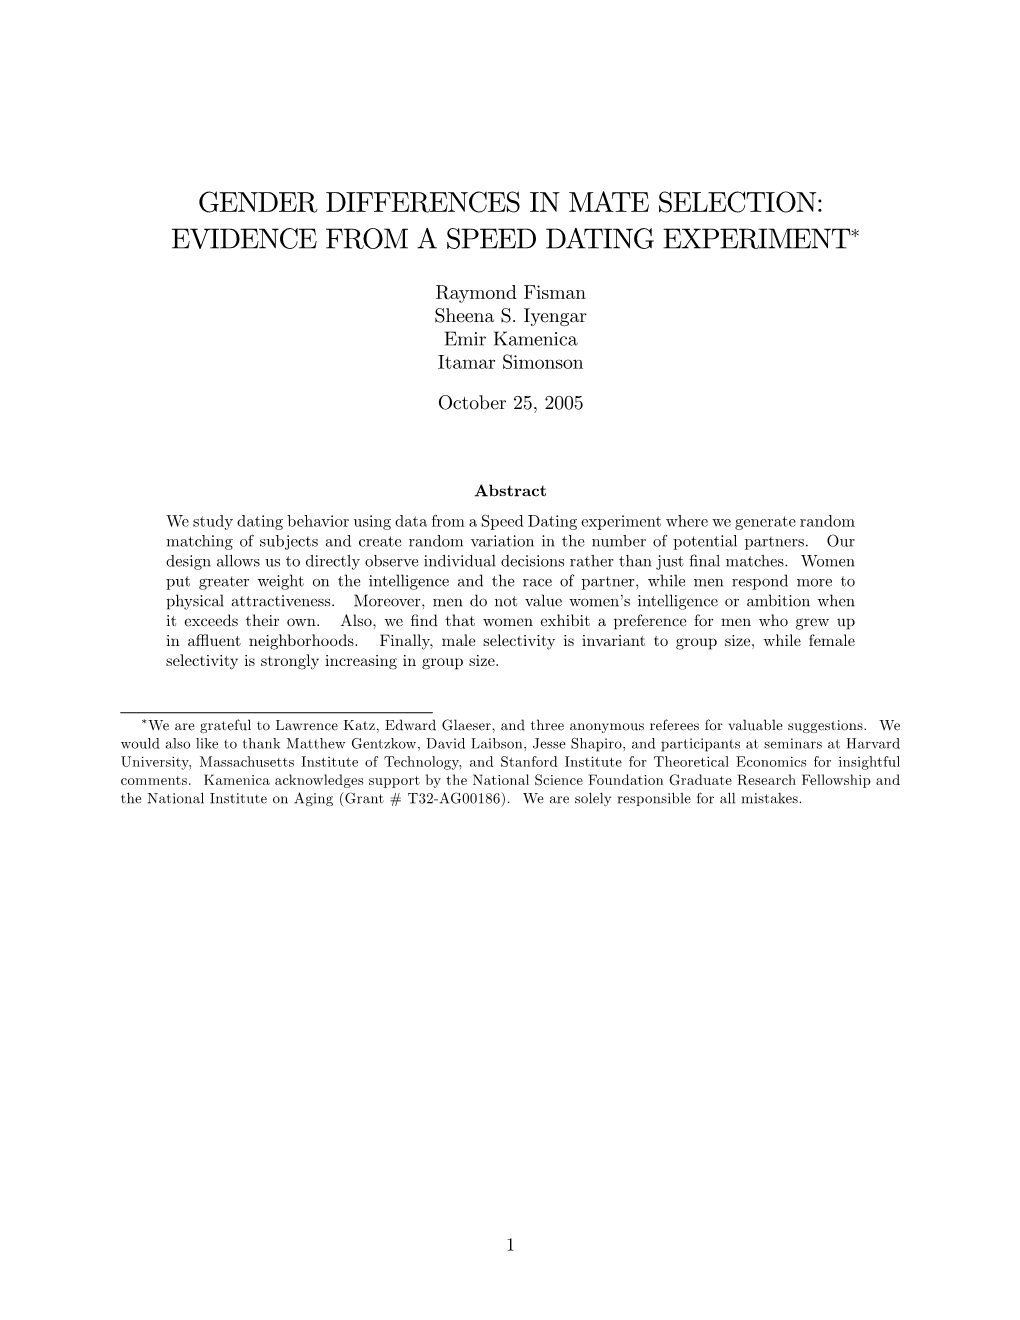 Gender Differences in Mate Selection: Evidence from a Speed Dating Experiment